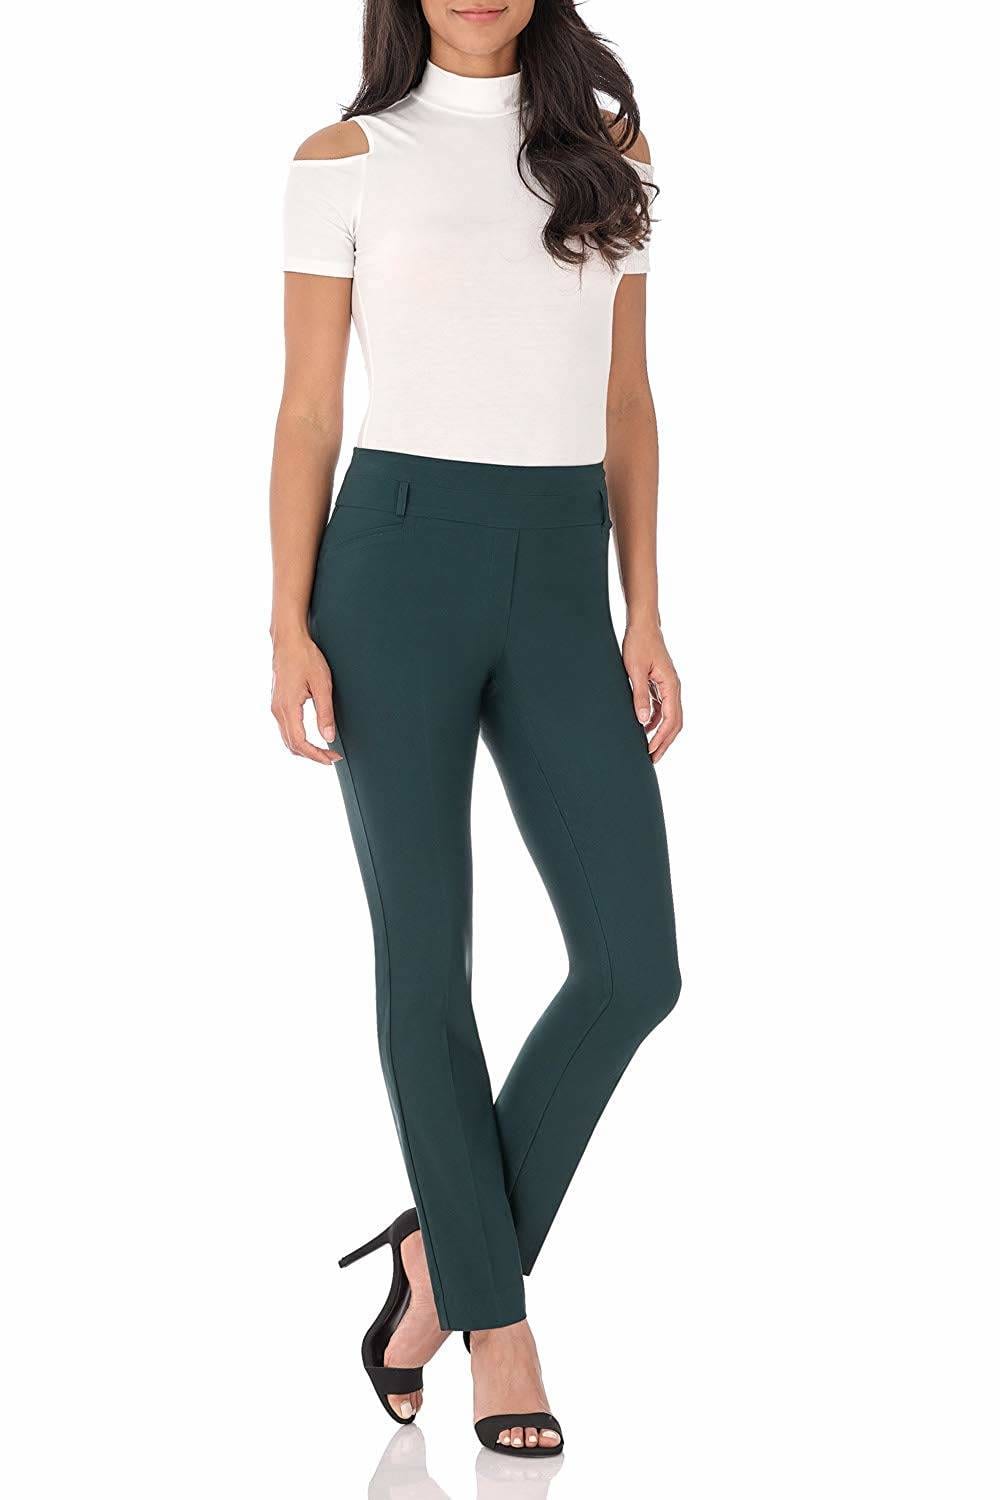 green pant for women